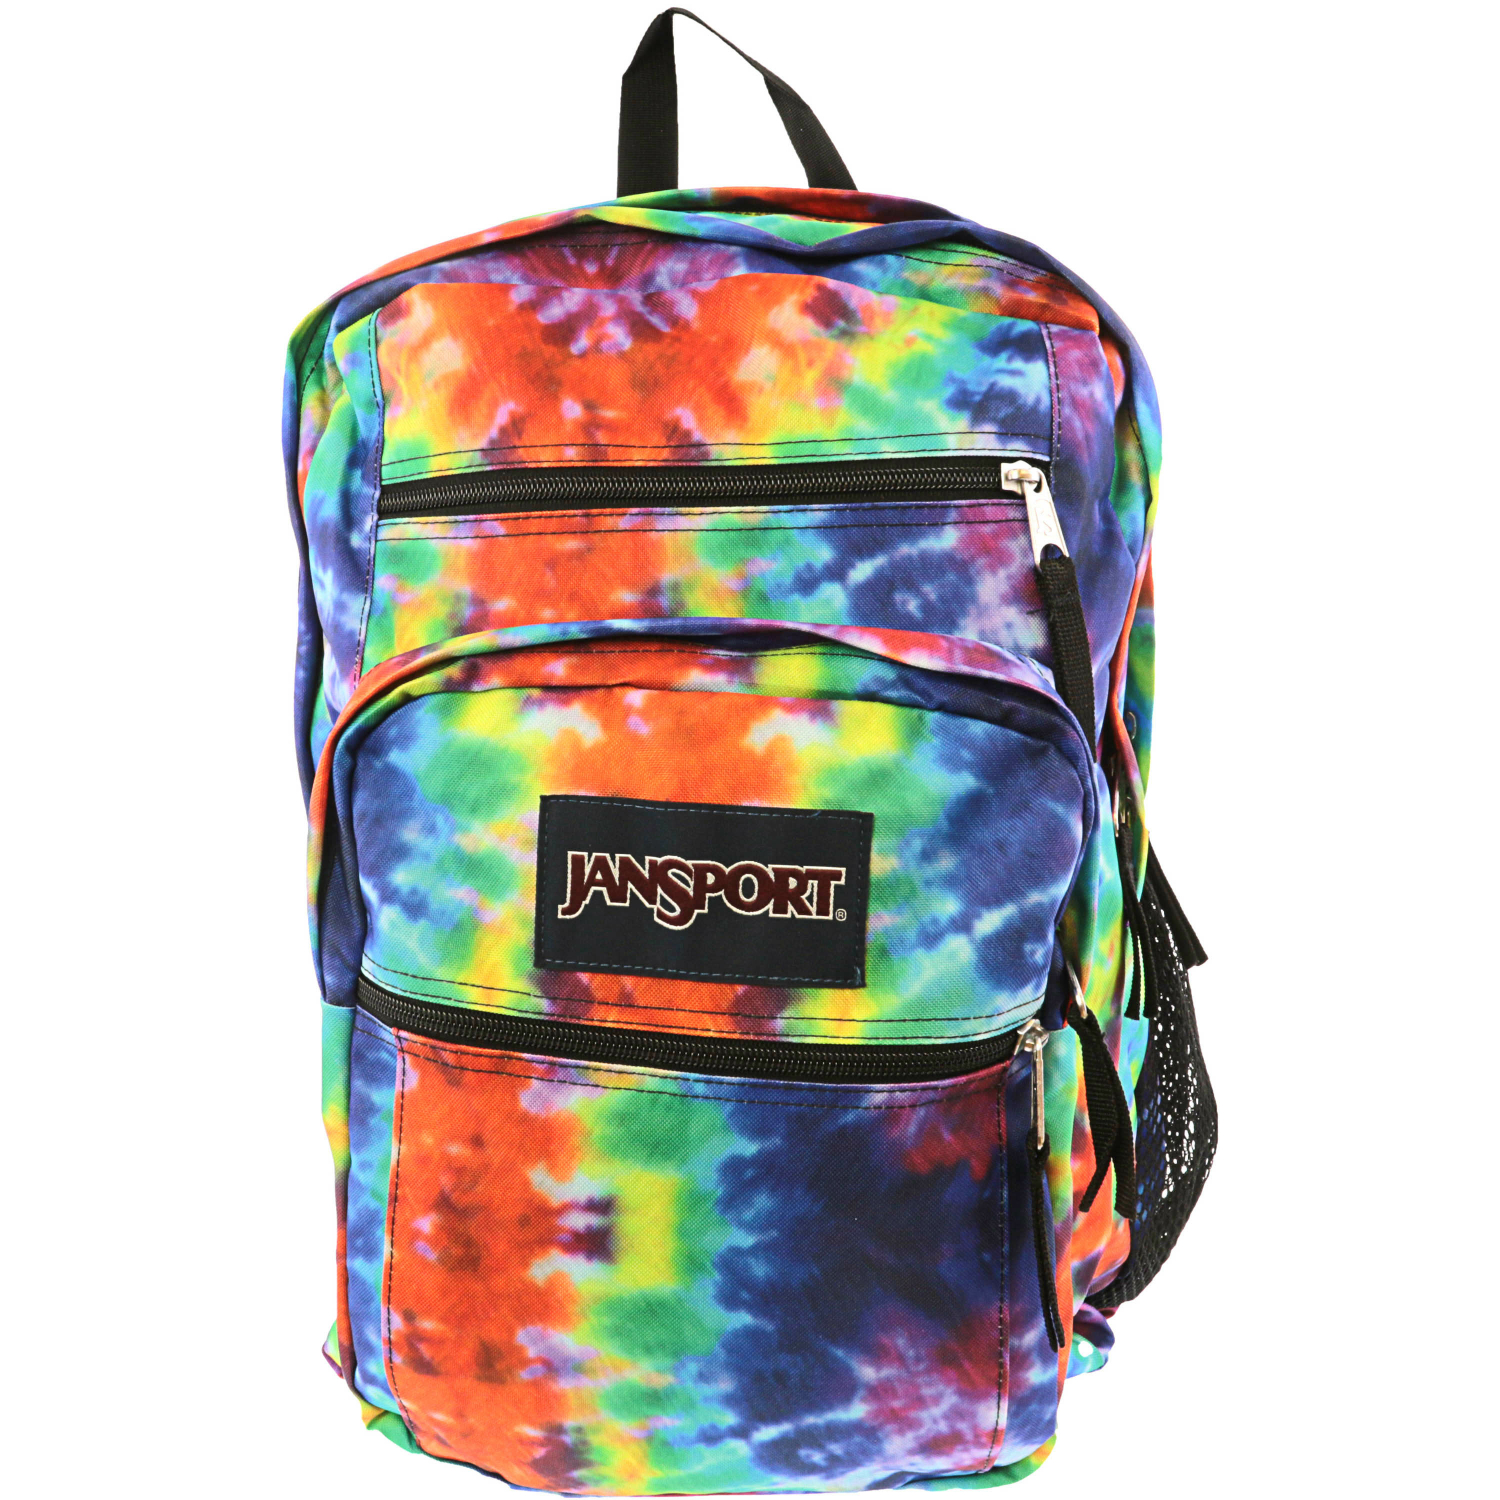 Jansport Big Student Polyester Backpack - Hippie Days Tie Dye - image 1 of 3